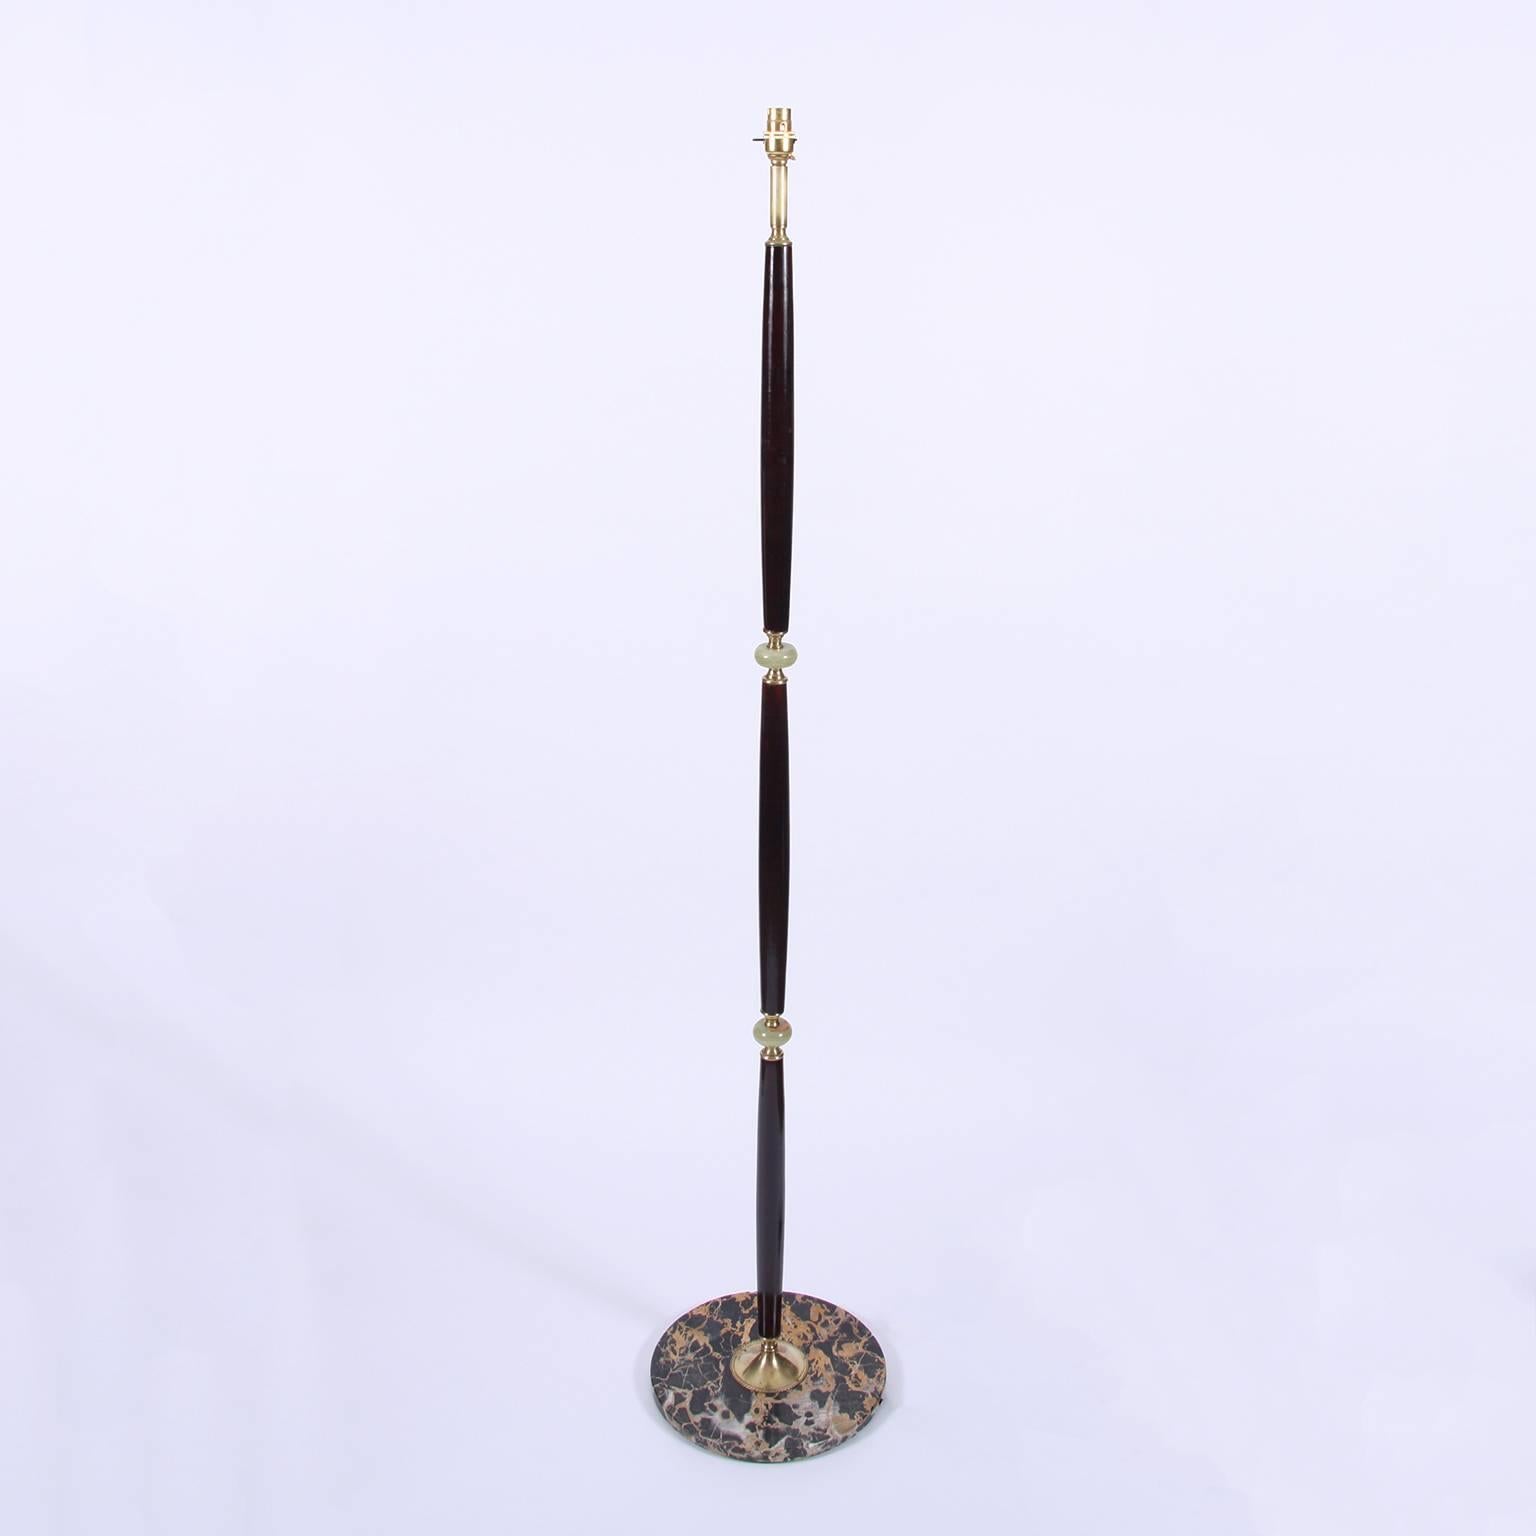 A stunning midcentury Italian floor lamp with lacquered wood sections interspersed with pale green alabaster. Dark marble base with brass detailing. There is slight pitting to some of the brass on the base. Otherwise this lamp is in fantastic